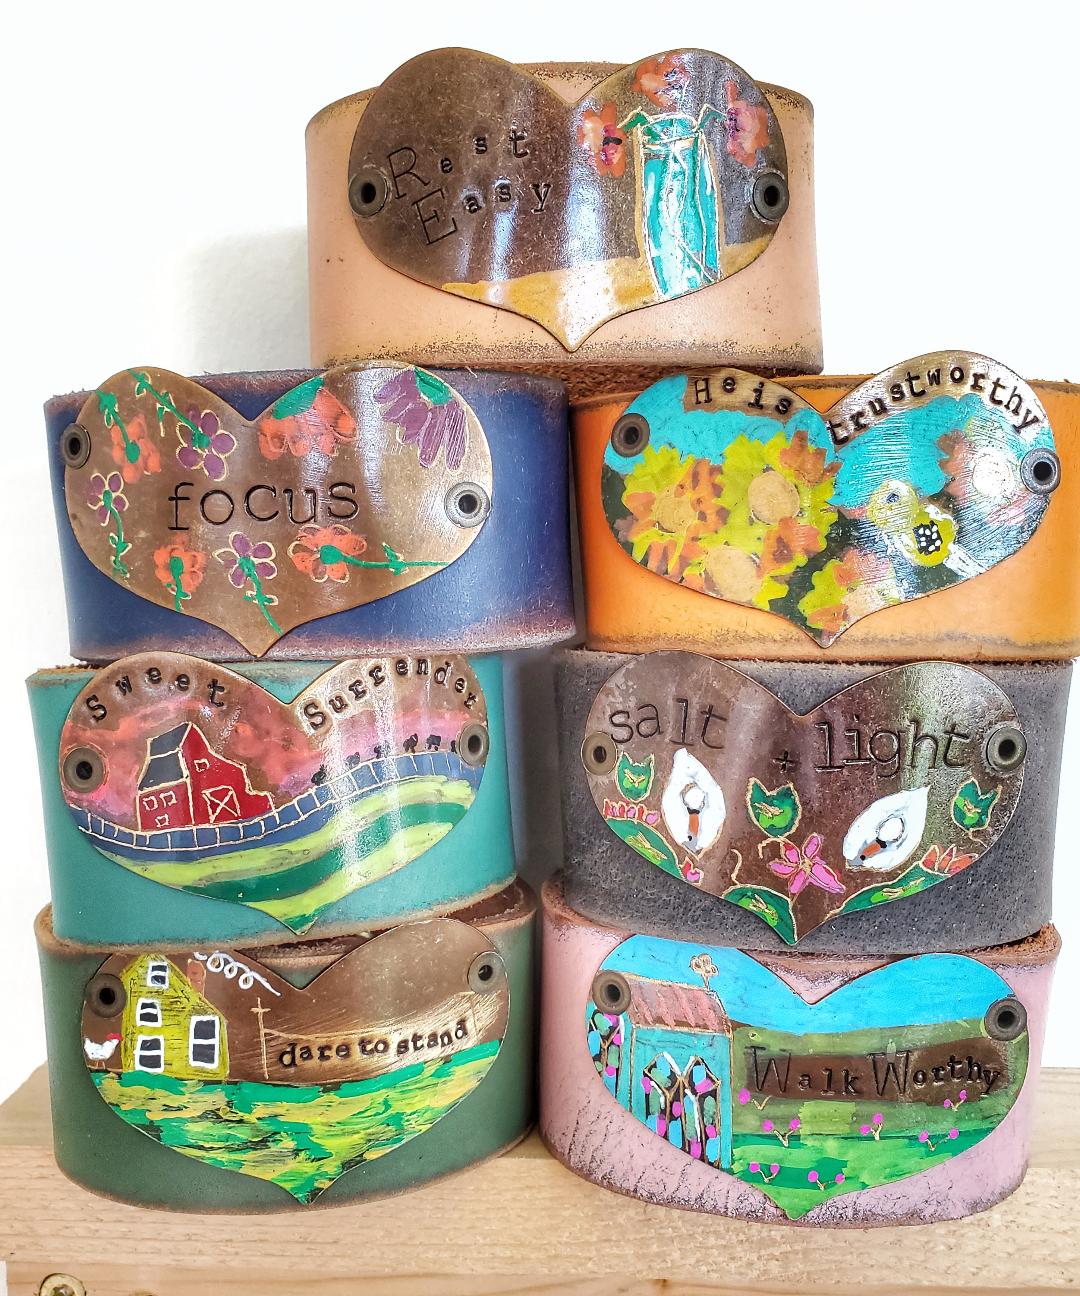 Painted Love Letter Leather cuffs (comes with art-card and letter)